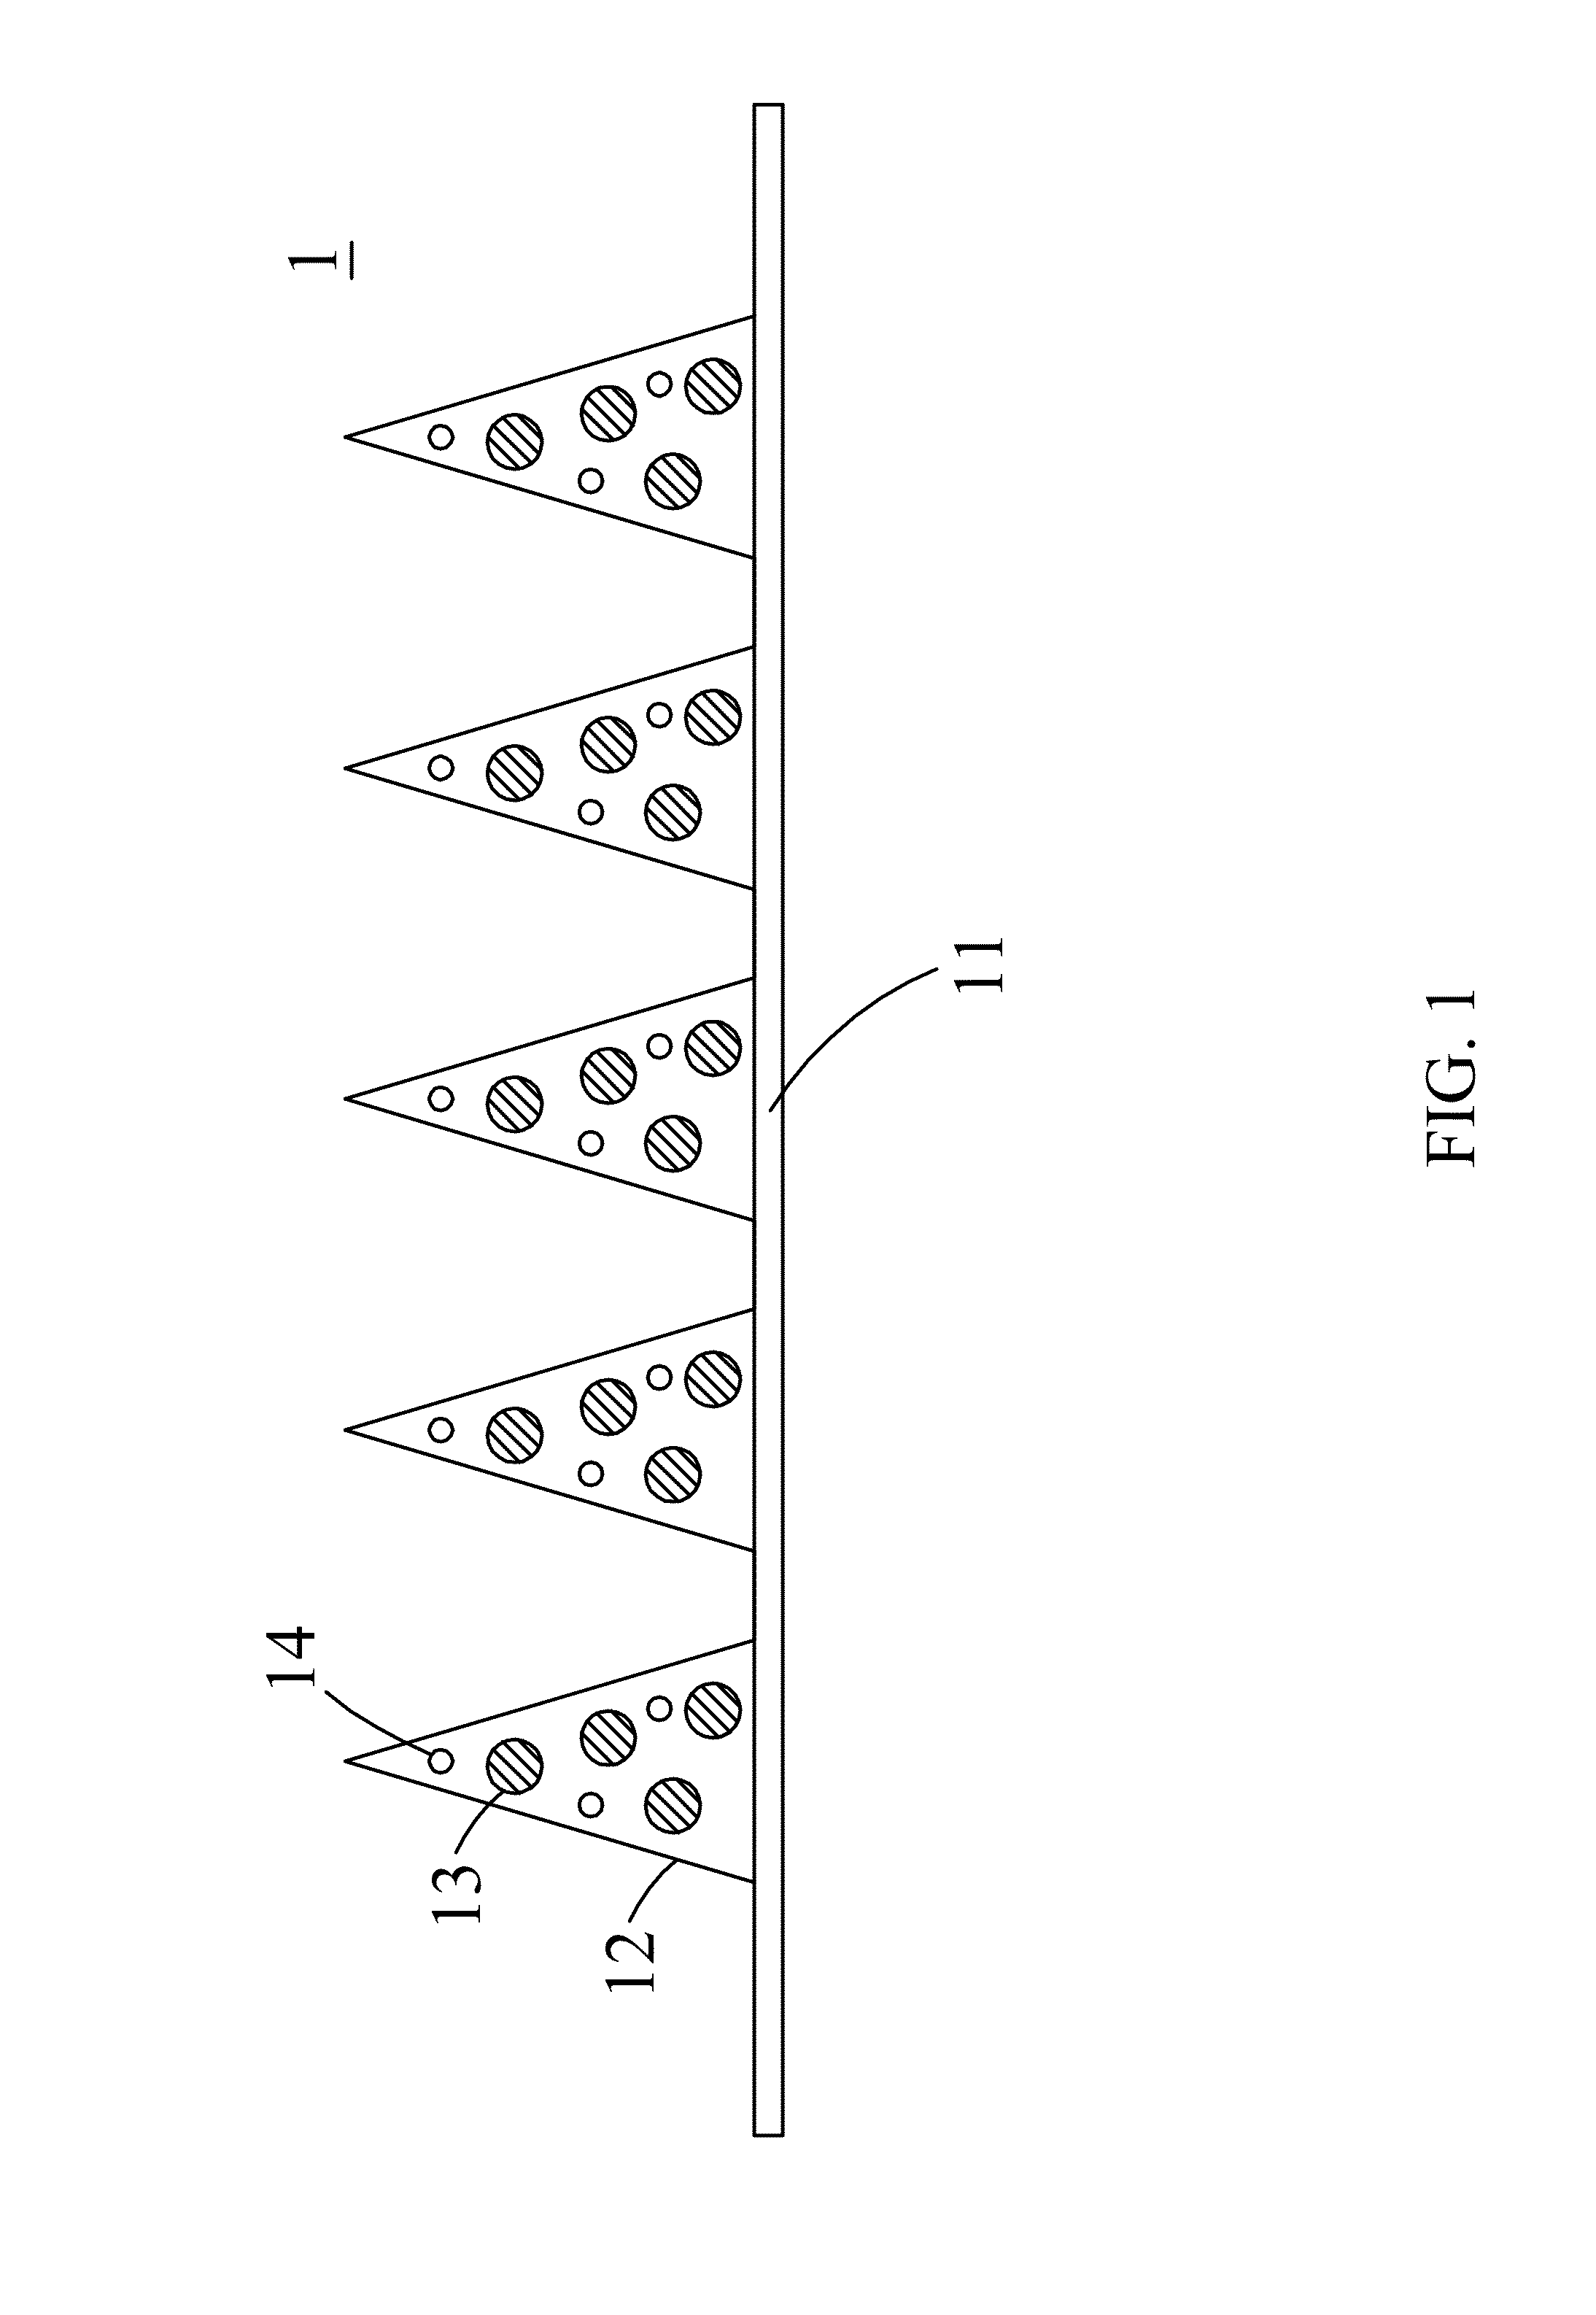 Transdermal drug delivery patch and method of controlling drug release of the same by near-IR